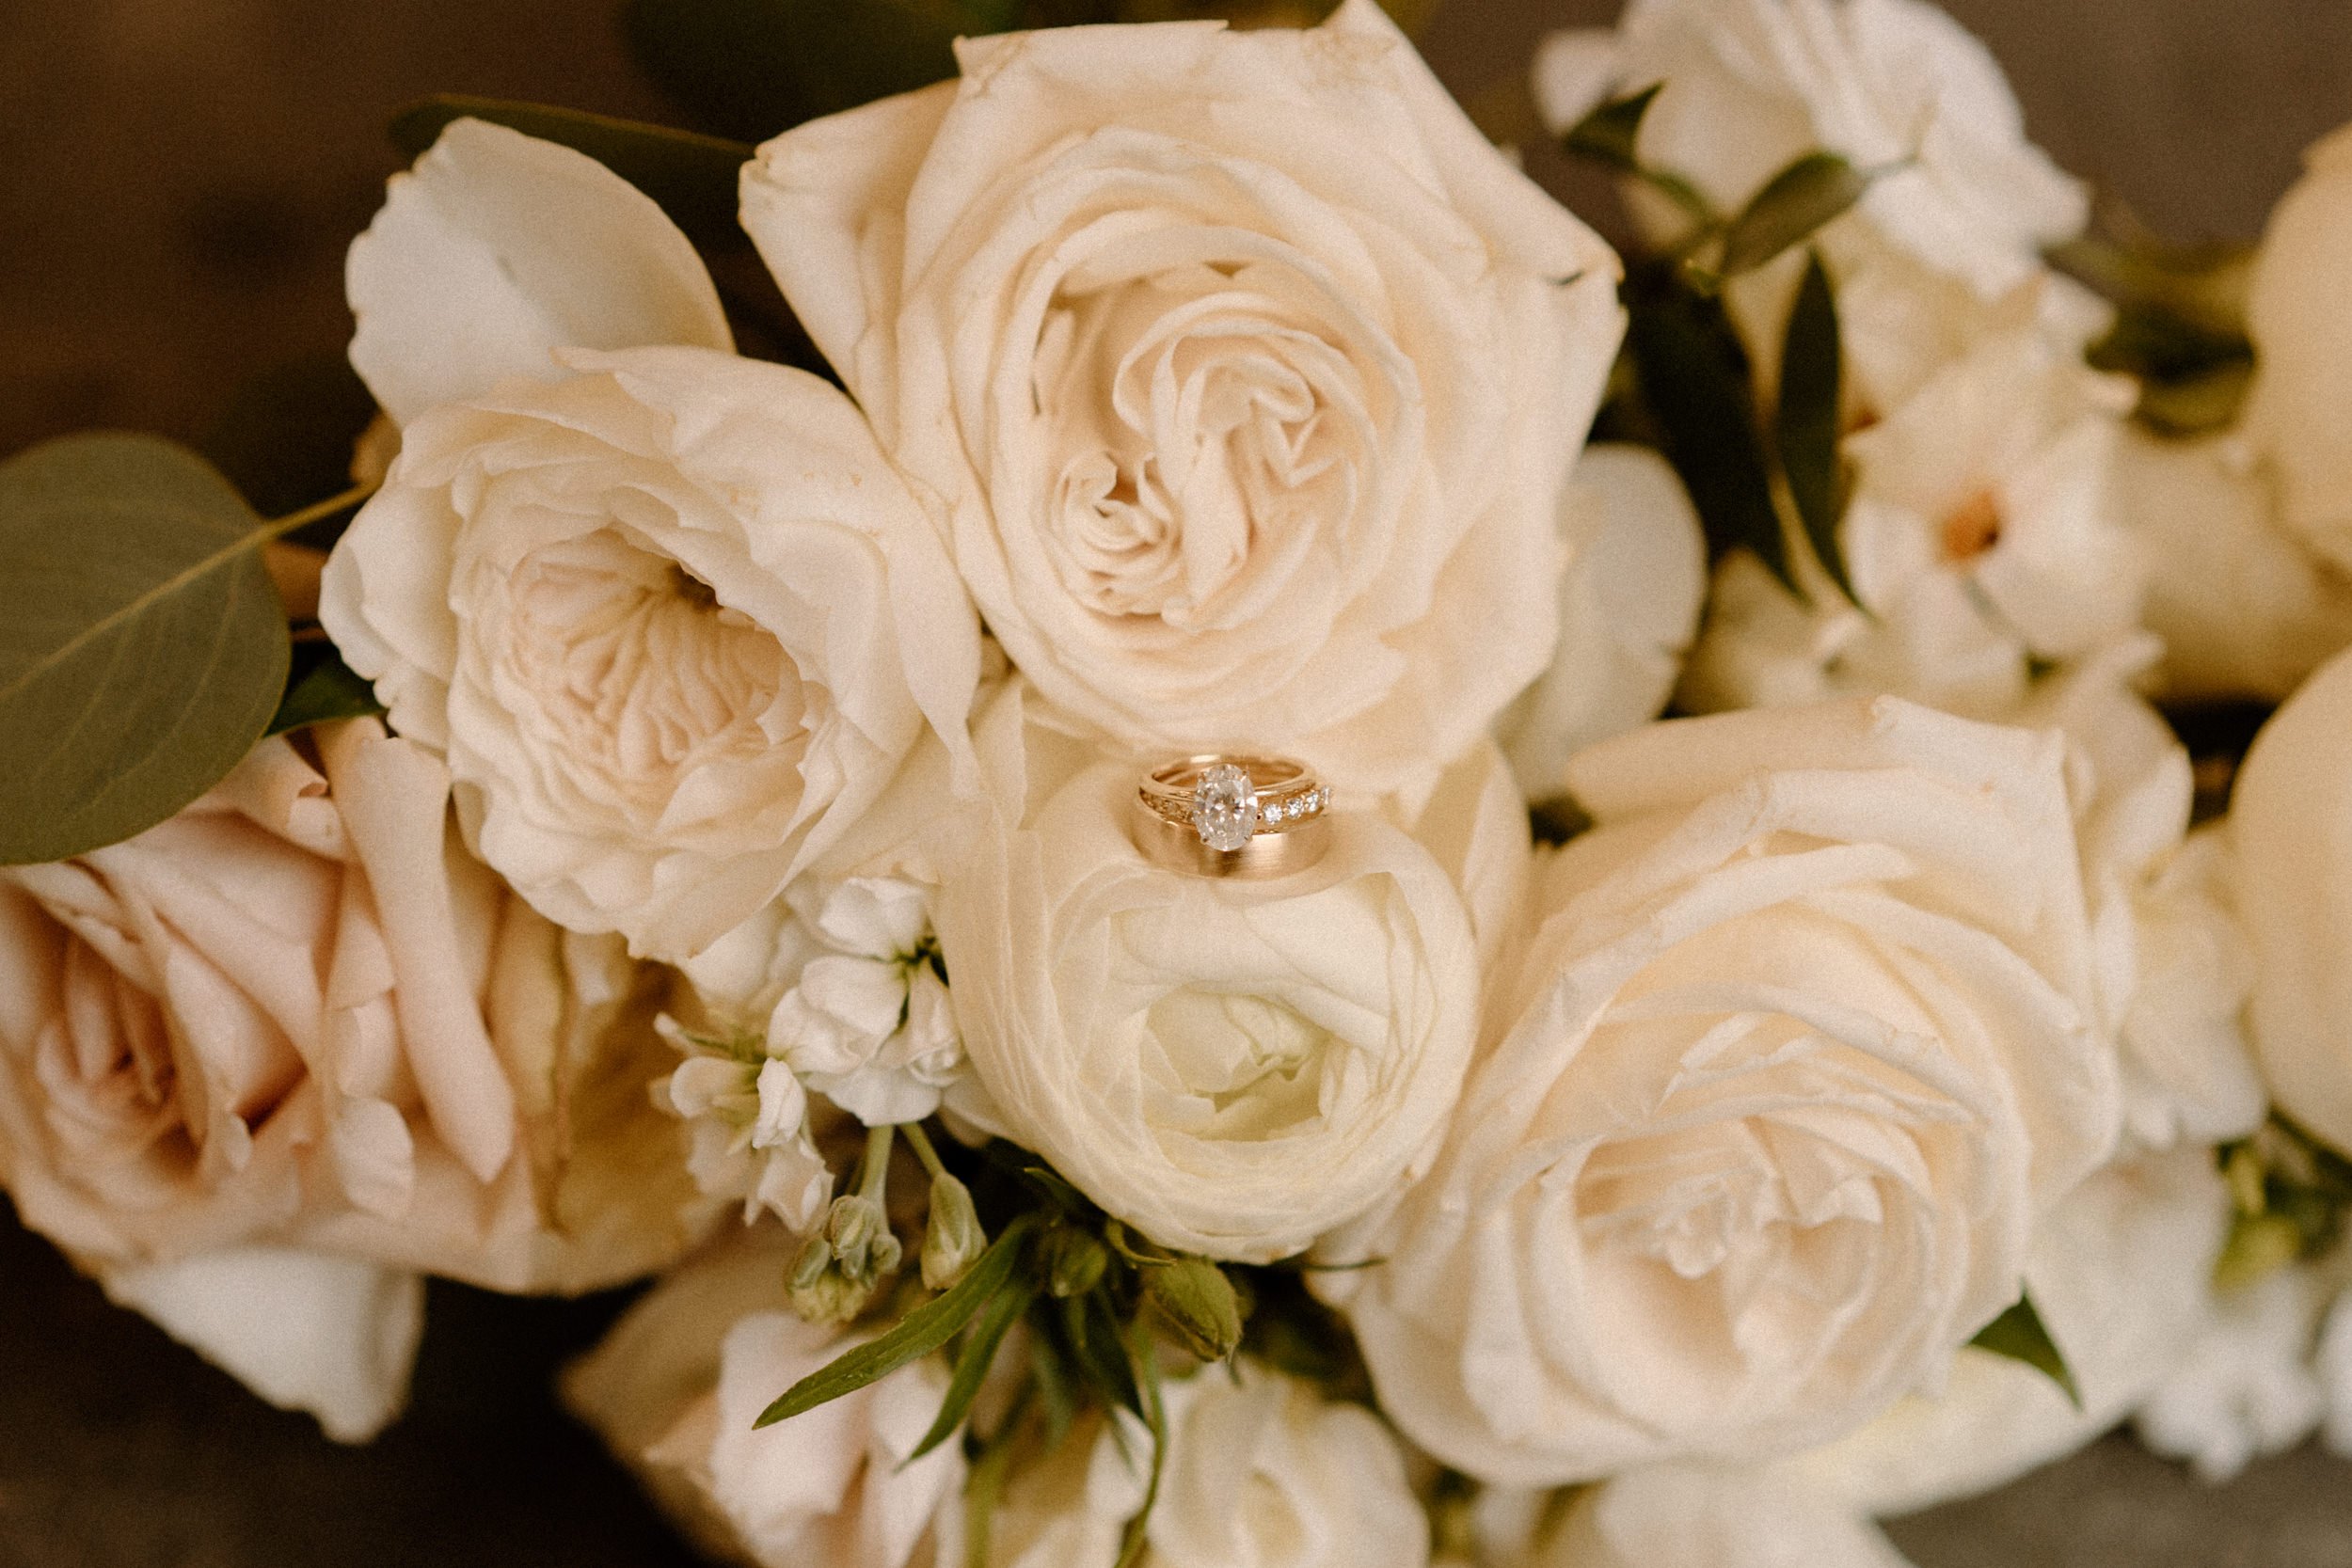 An engagement ring placed atop a white rose bouquet